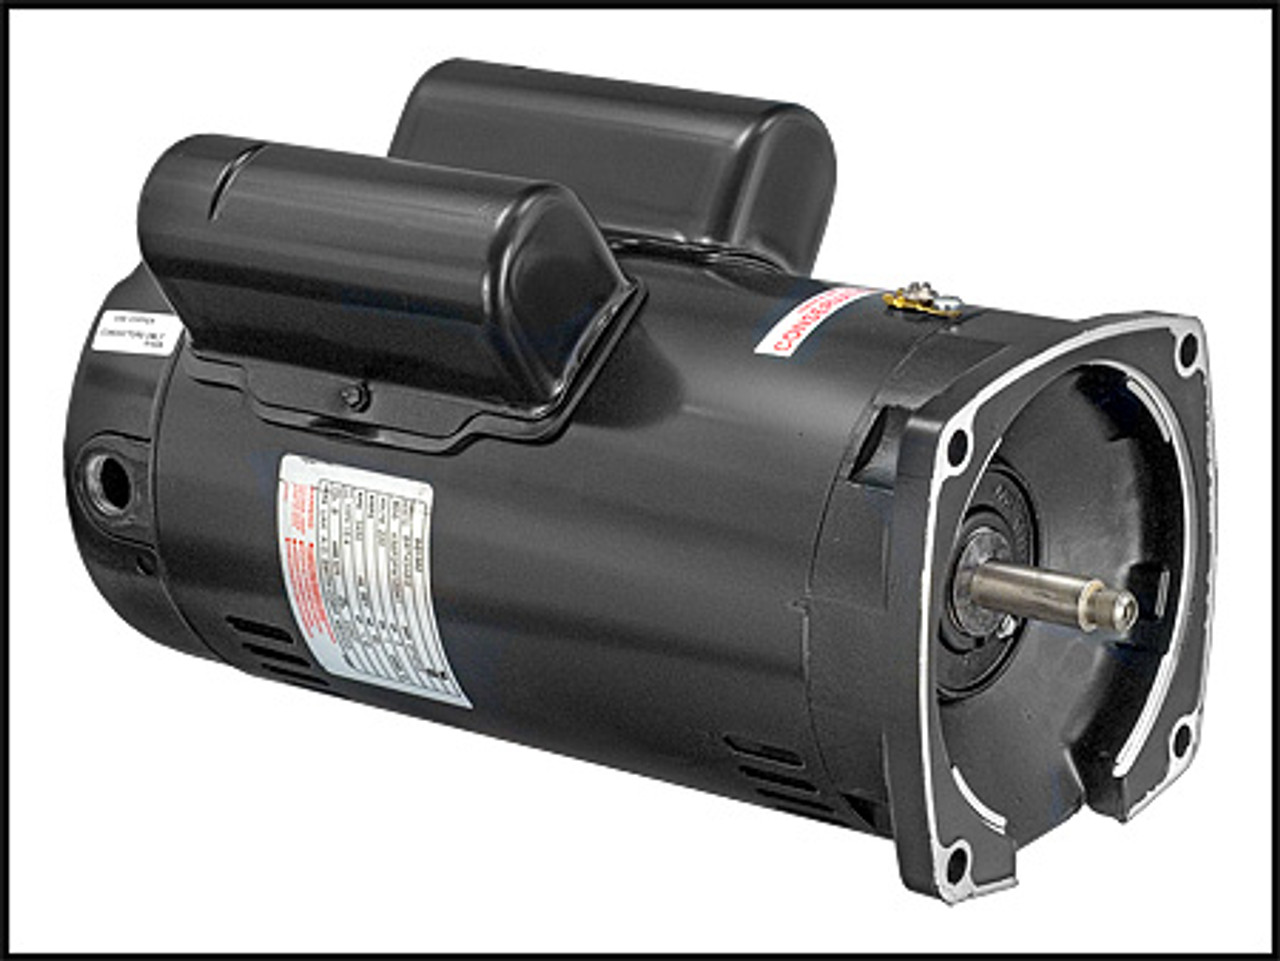 Regal Beloit/A.O. Smith 3 HP 230V Only 1 Phase Flanged Motor For Pool Pumps (#SQ1302V1)